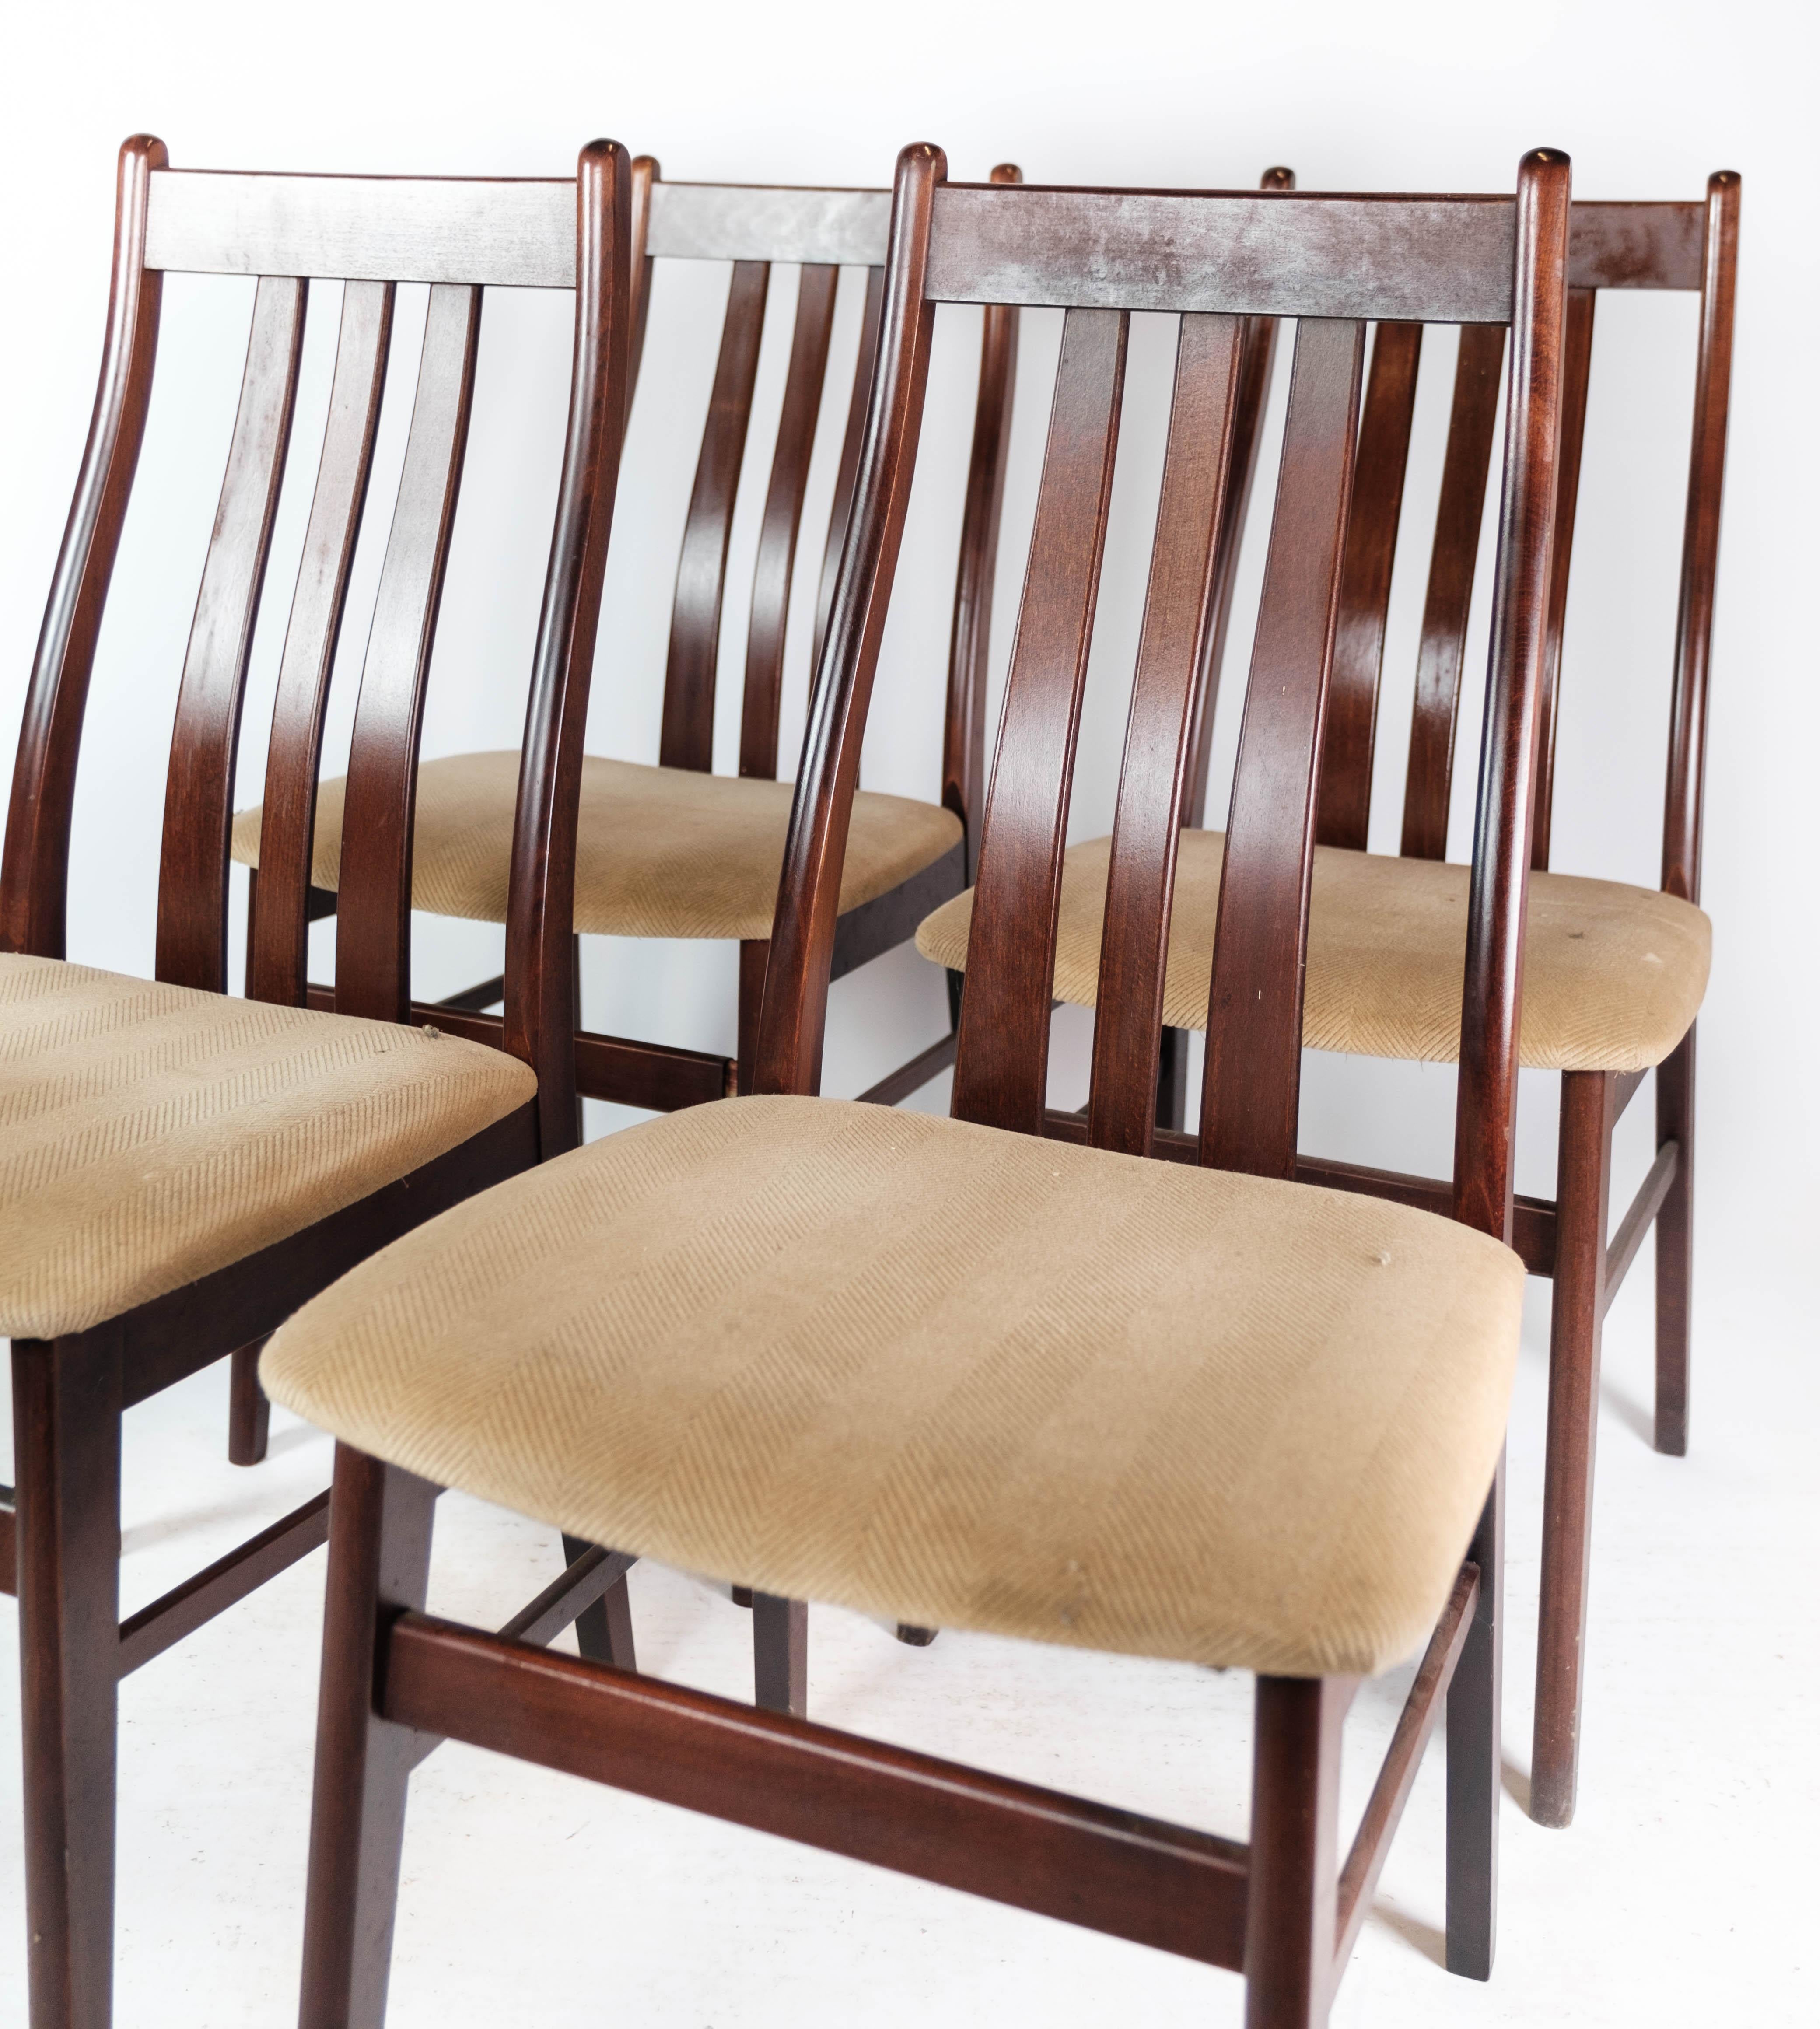 Mid-20th Century Set of Four Dining Room Chairs Made In Mahogany By Farstrup From 1960s For Sale